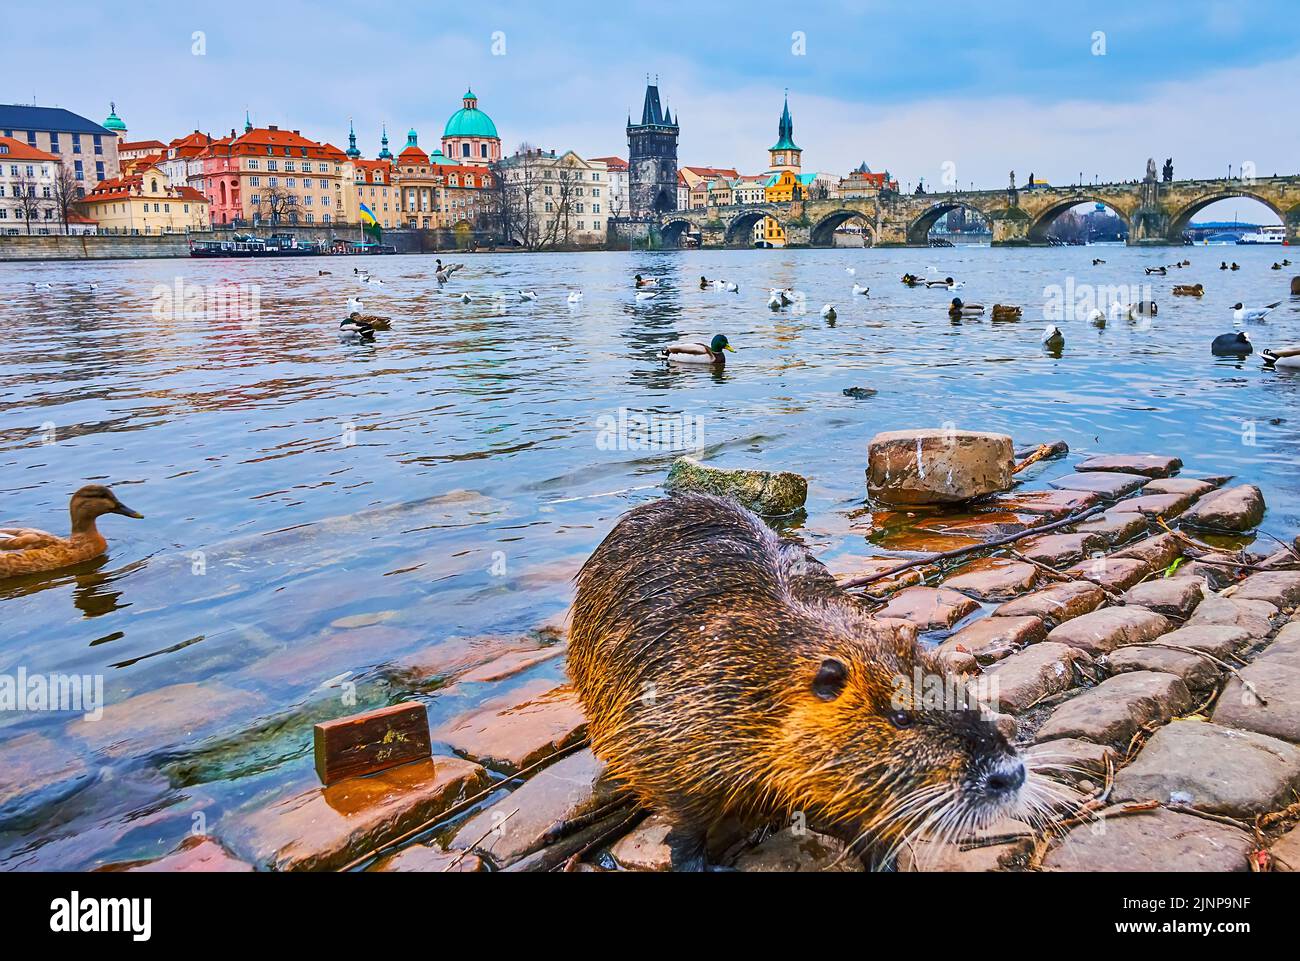 The beaver on the bank of Vltava River with medieval Charles Bridge in background, Prague, Czech Republic Stock Photo